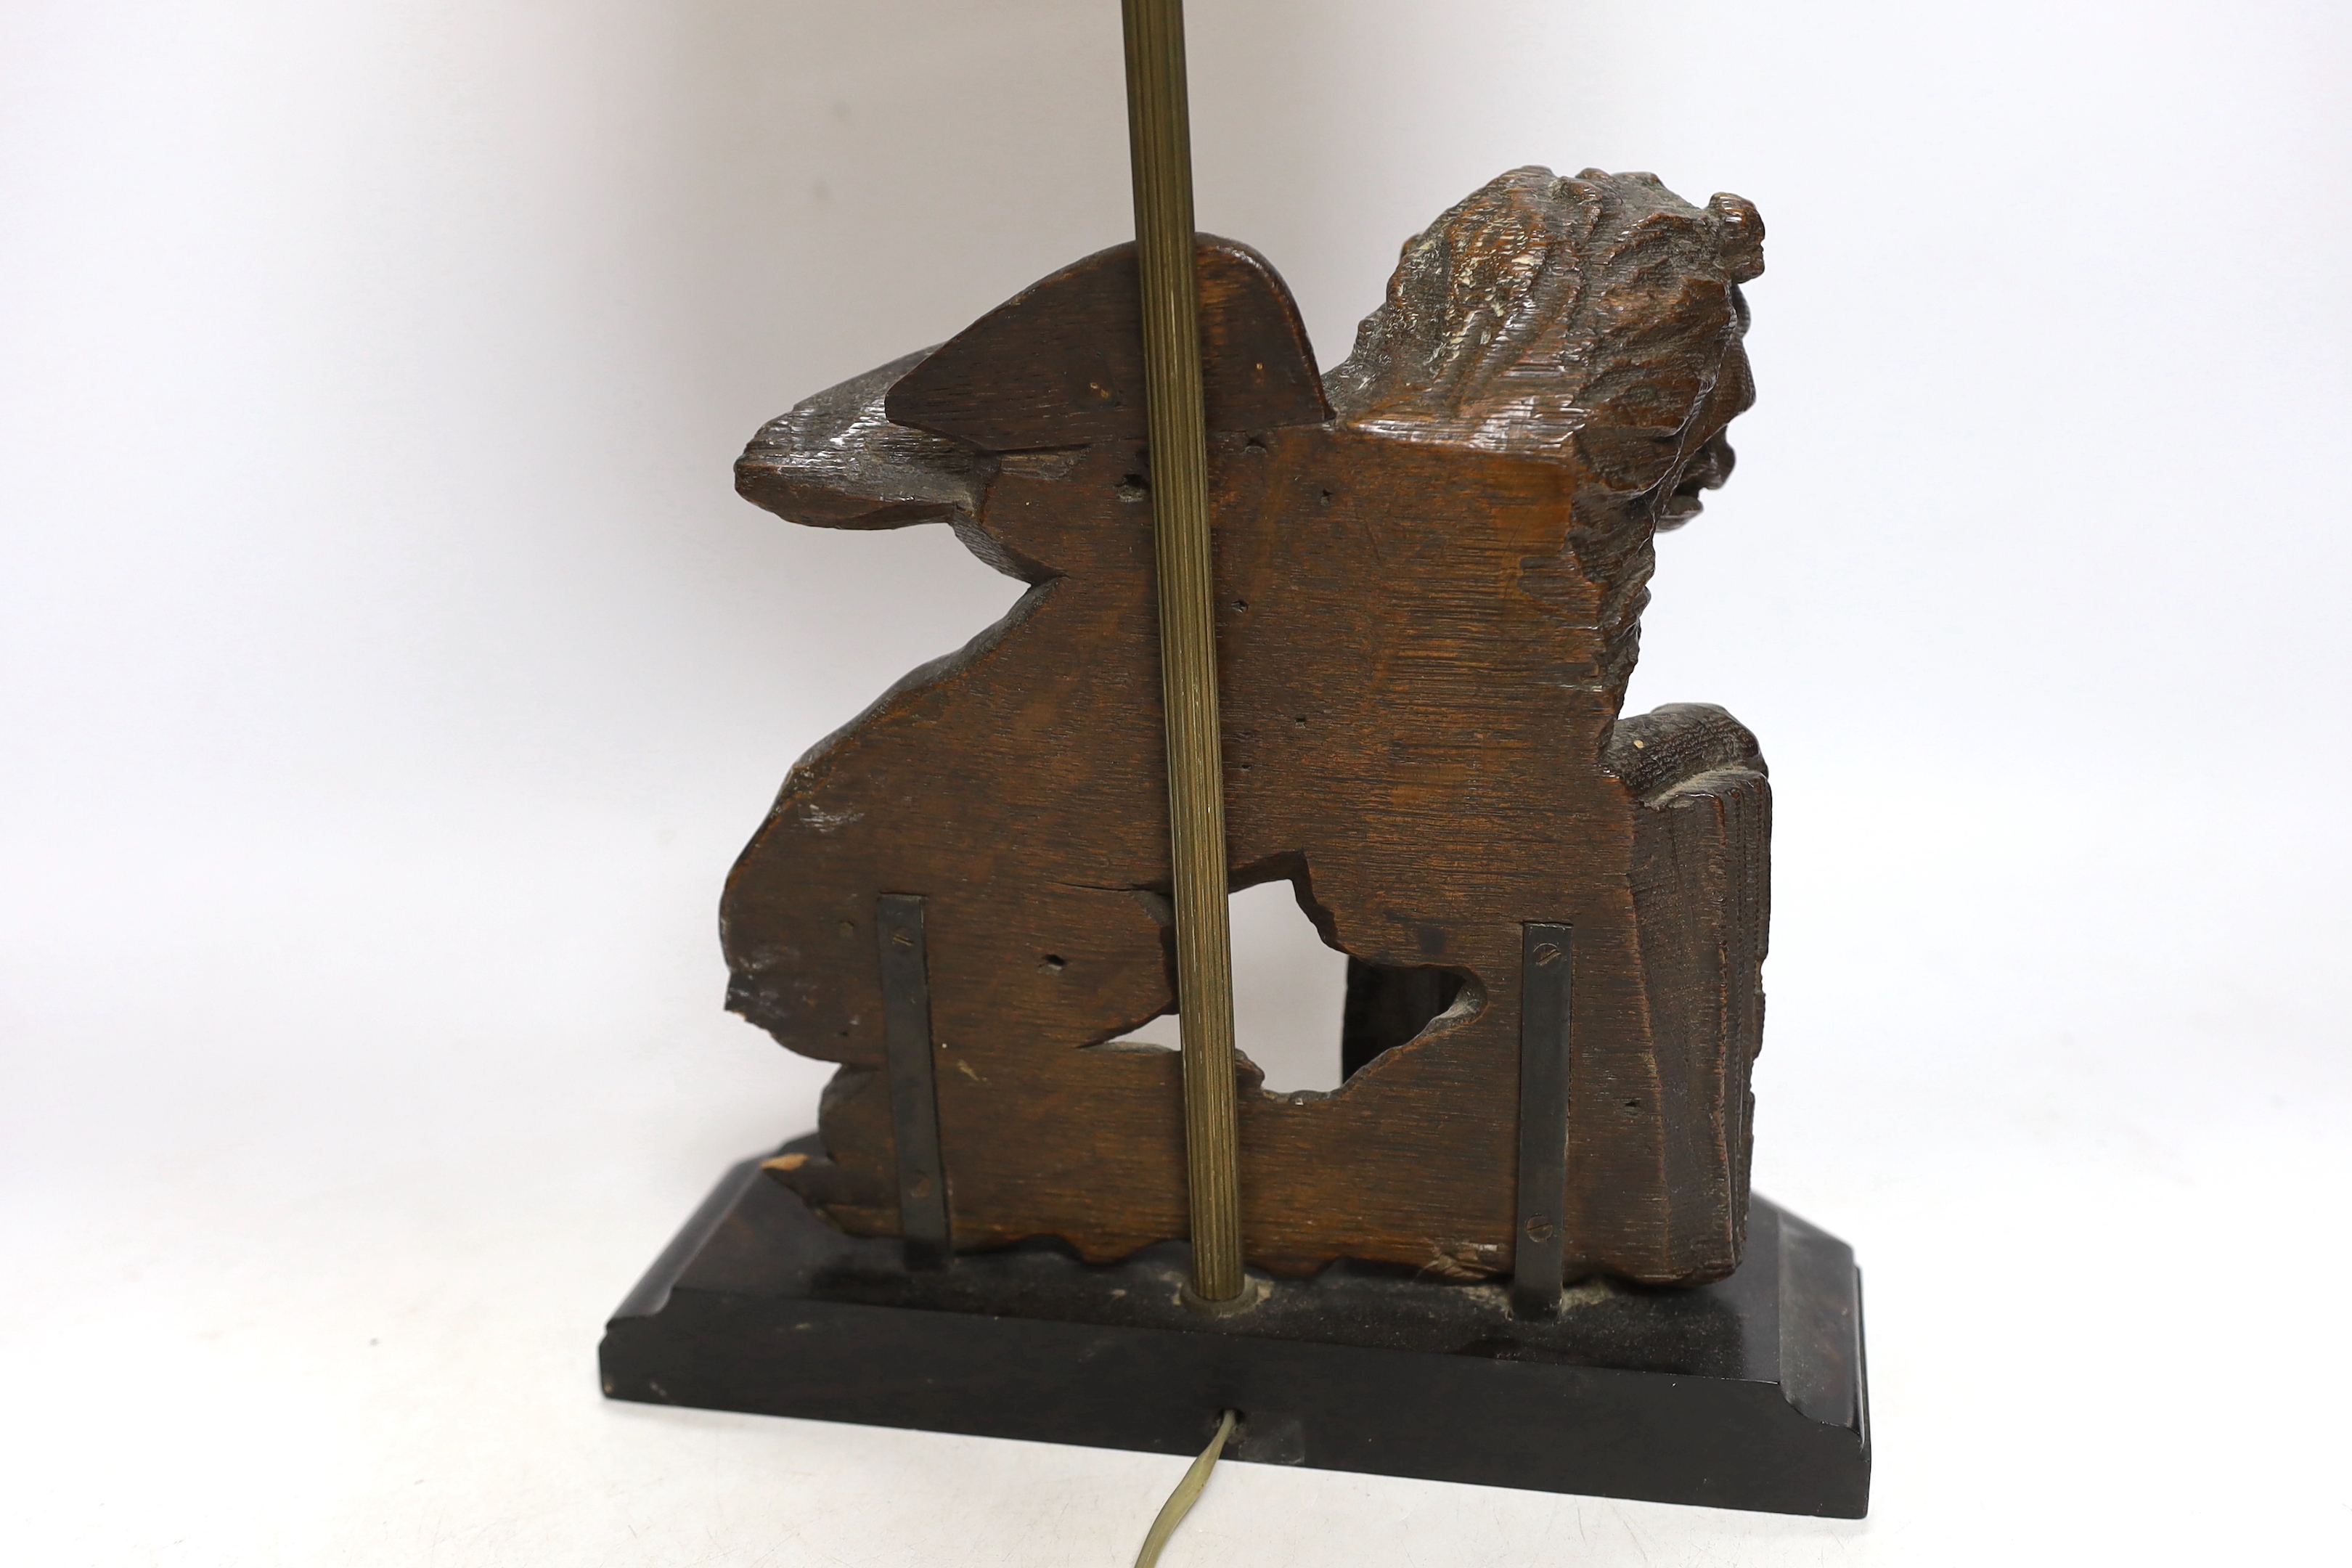 An 18th century oak carving of a Heraldic lion, now as a lamp, 55cm high including shade